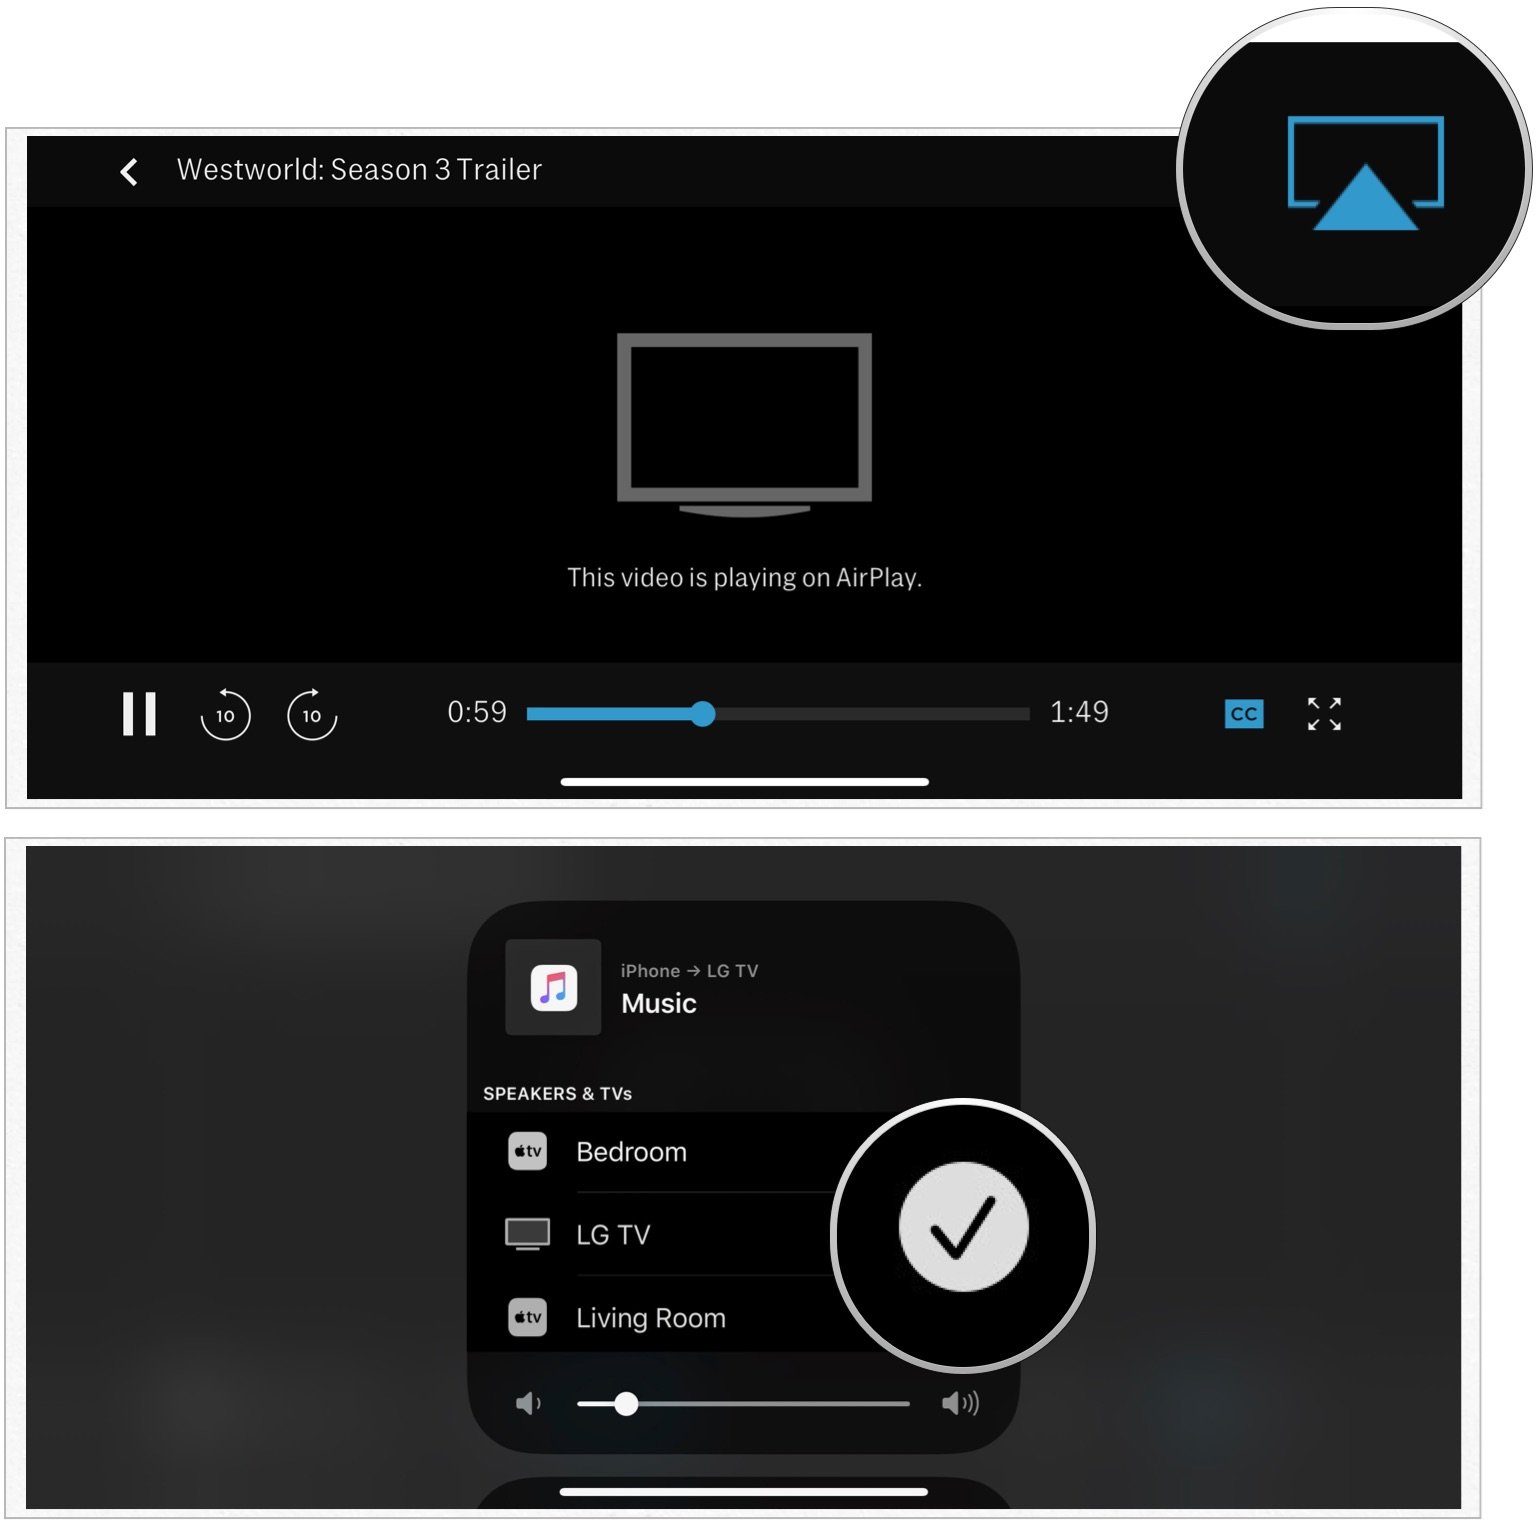 To stop casting video, tap the AirPlay icon on the vide screen, then uncheck the television. 